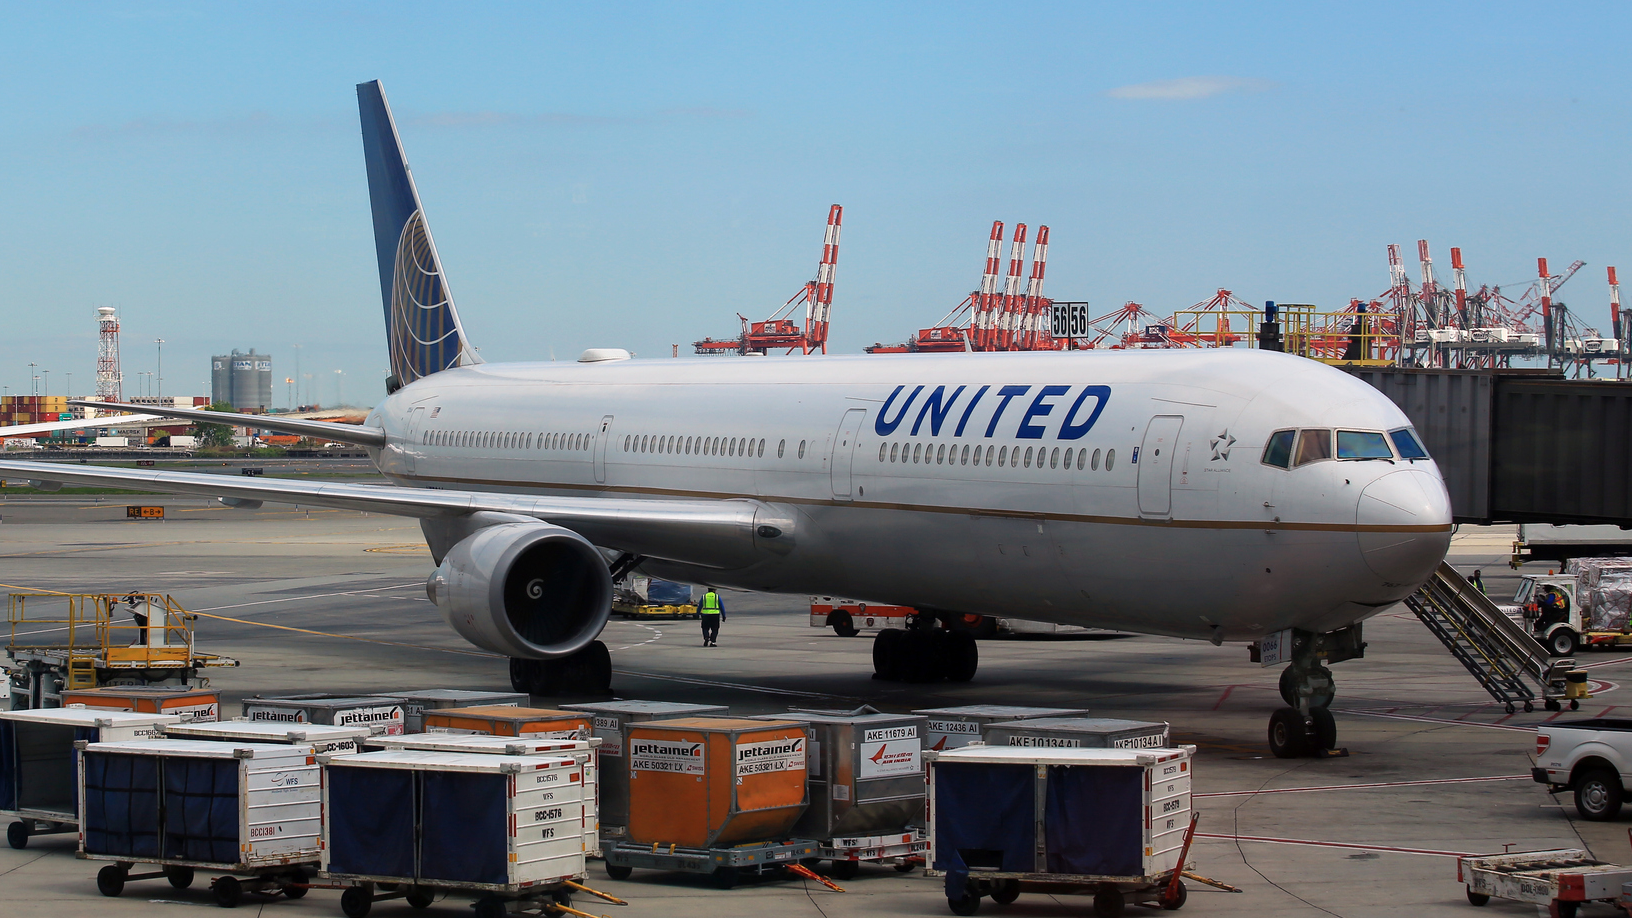 United Airlines passengers recall ‘scary’ explosion of Boeing 777 engine